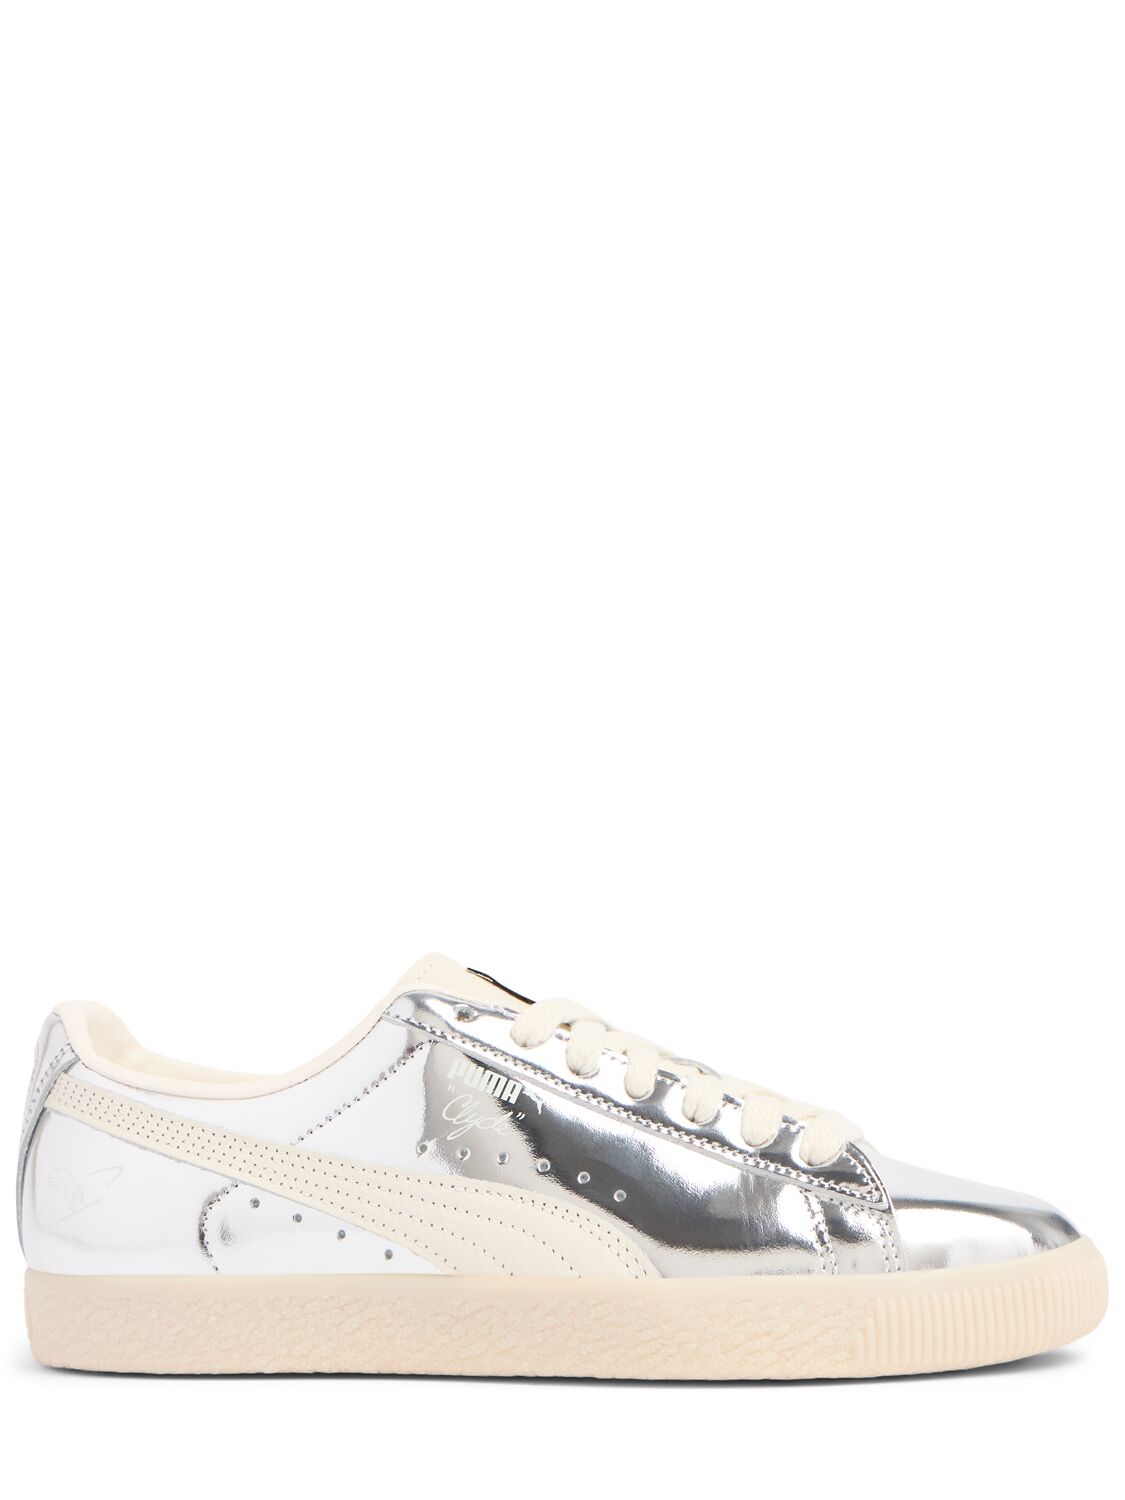 Puma Clyde 3024 Sneakers In Silver